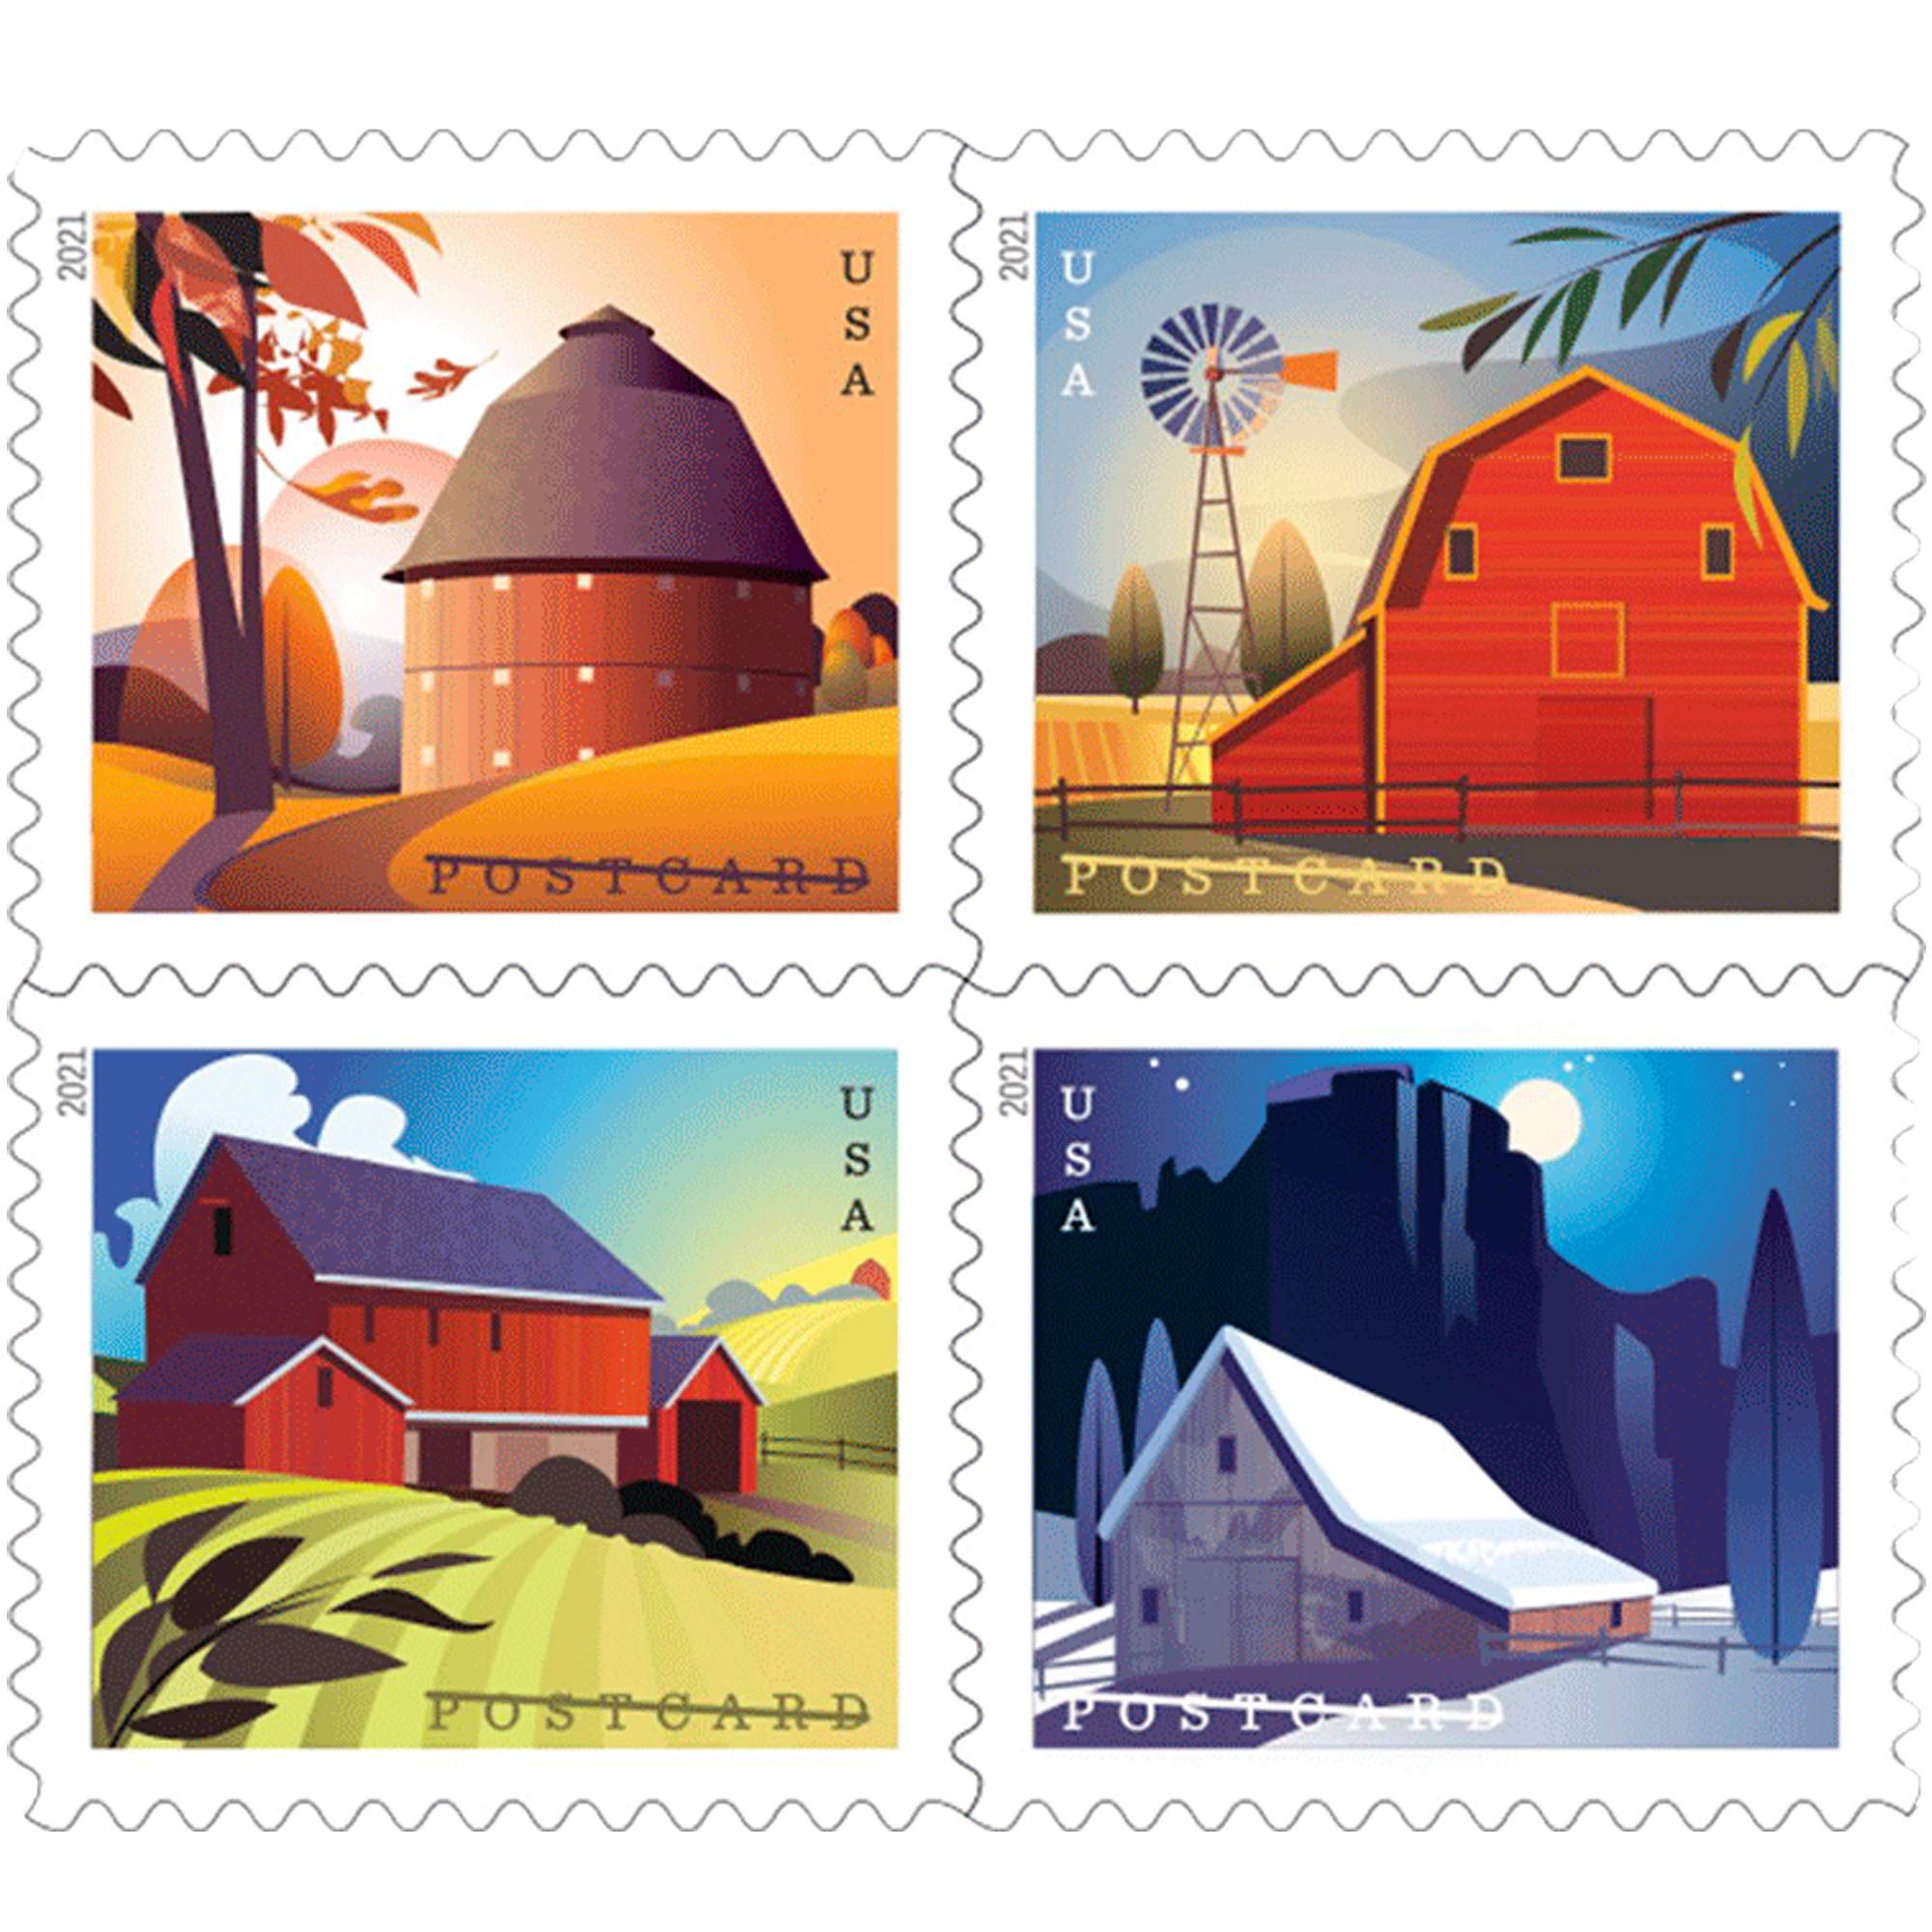 Barn Postcard Forever Postage Stamps 2 Sheets of 20 US Postal First Class American History Wedding Celebration Anniversary (40 Stamps)